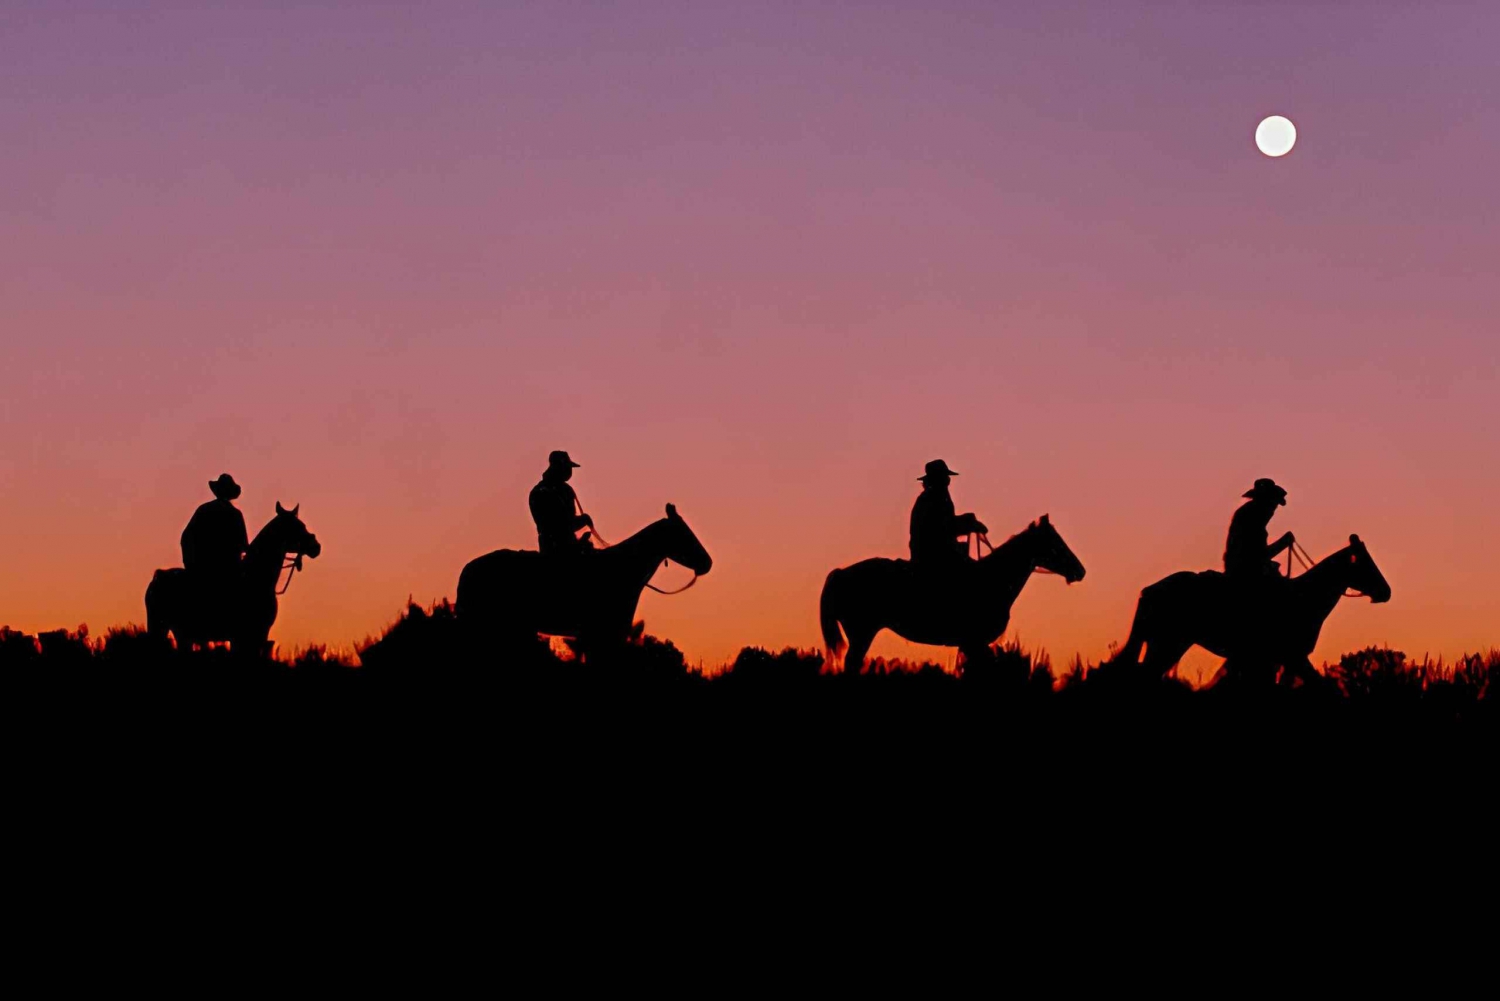 Sunset Horseback Riding Tour at Macao Beach with Transfers